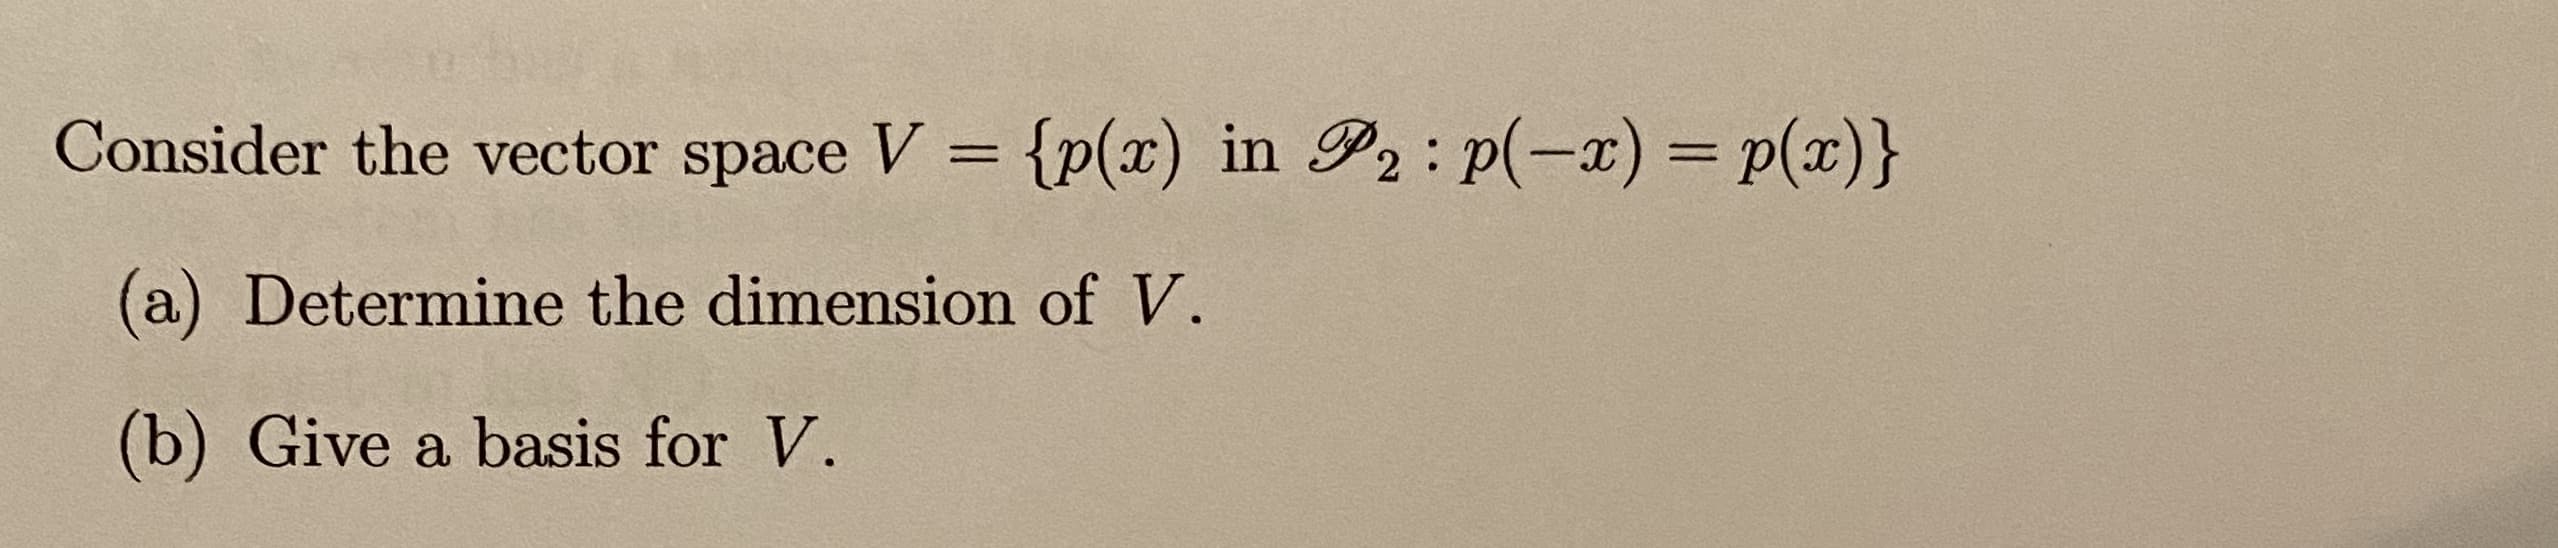 Consider the vector space V {p(x) in P2 : p(-x) = p(x)}
(a) Determine the dimension of V.
(b) Give a basis for V.
